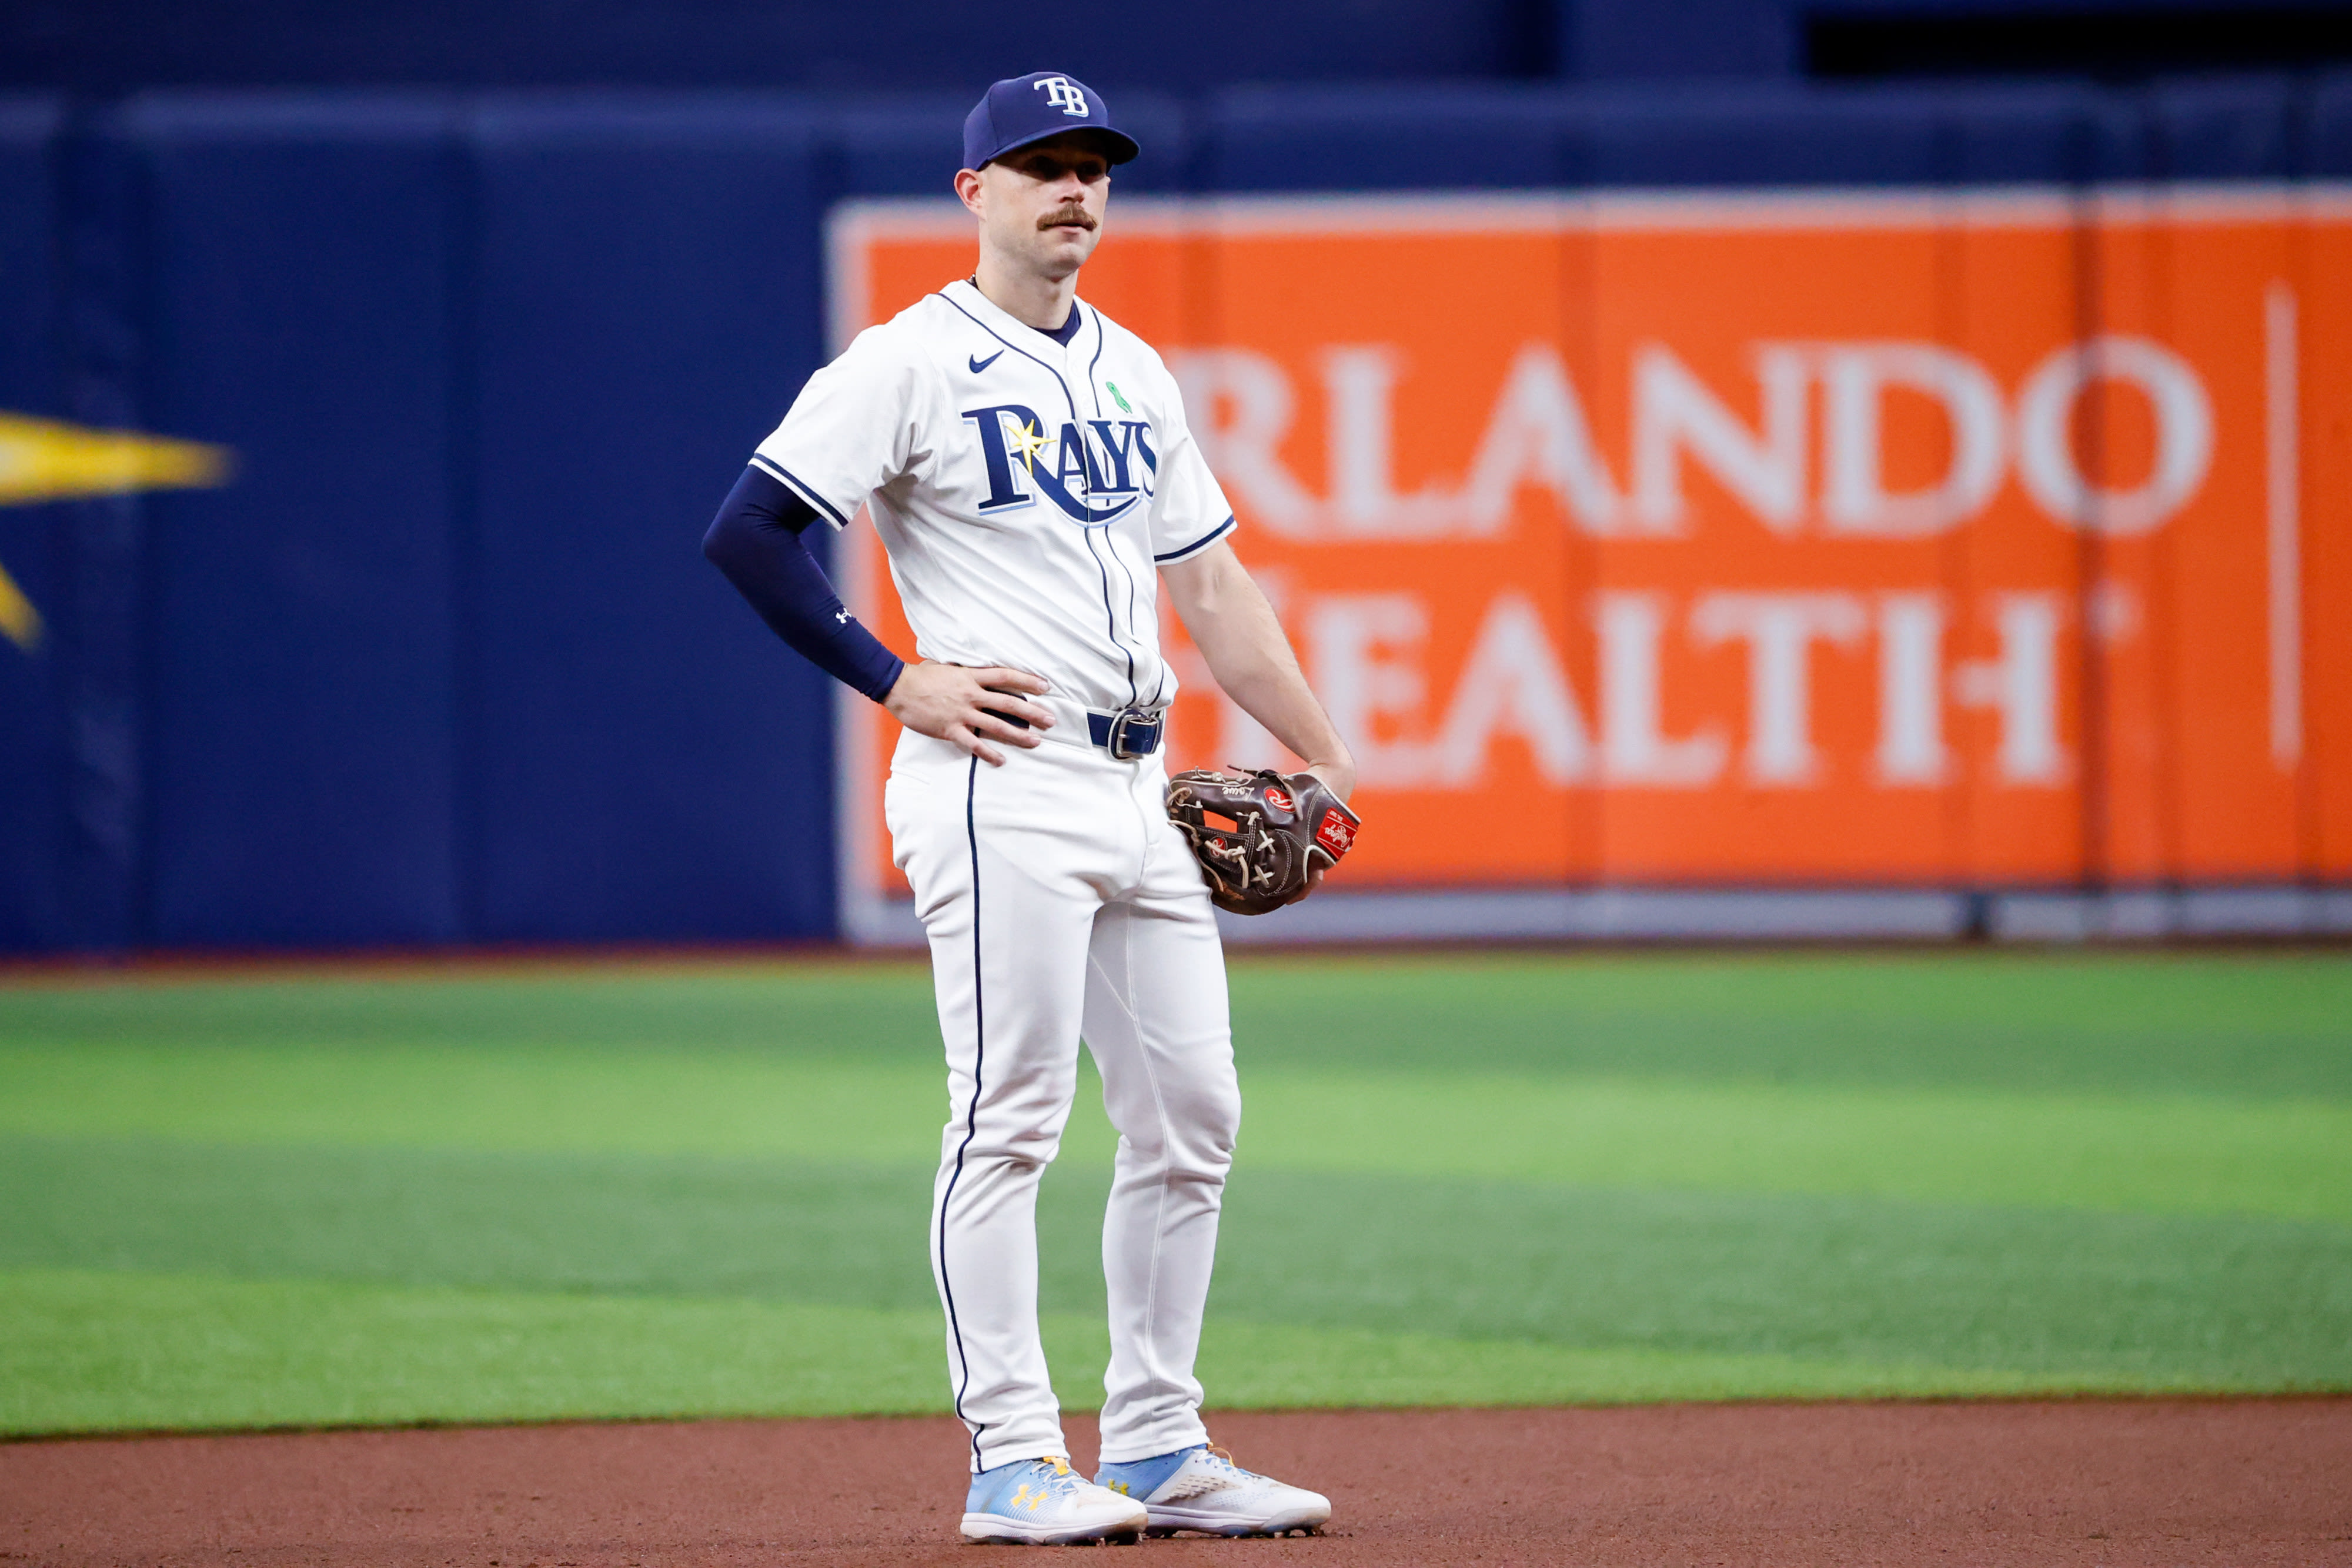 The Rays’ best players aren’t pulling their weight